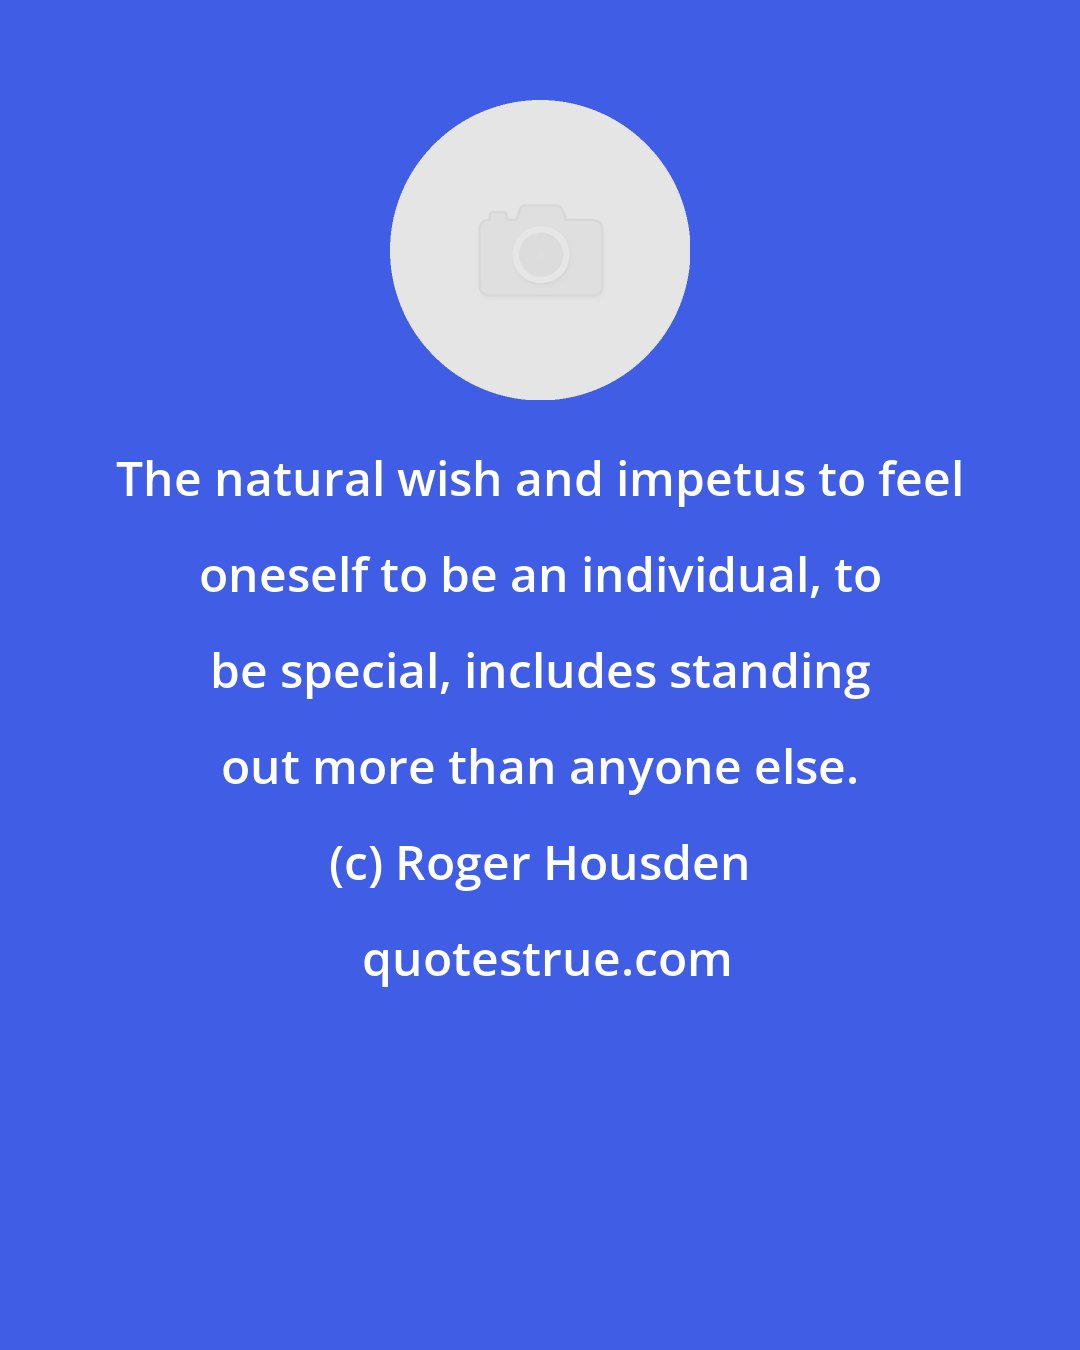 Roger Housden: The natural wish and impetus to feel oneself to be an individual, to be special, includes standing out more than anyone else.